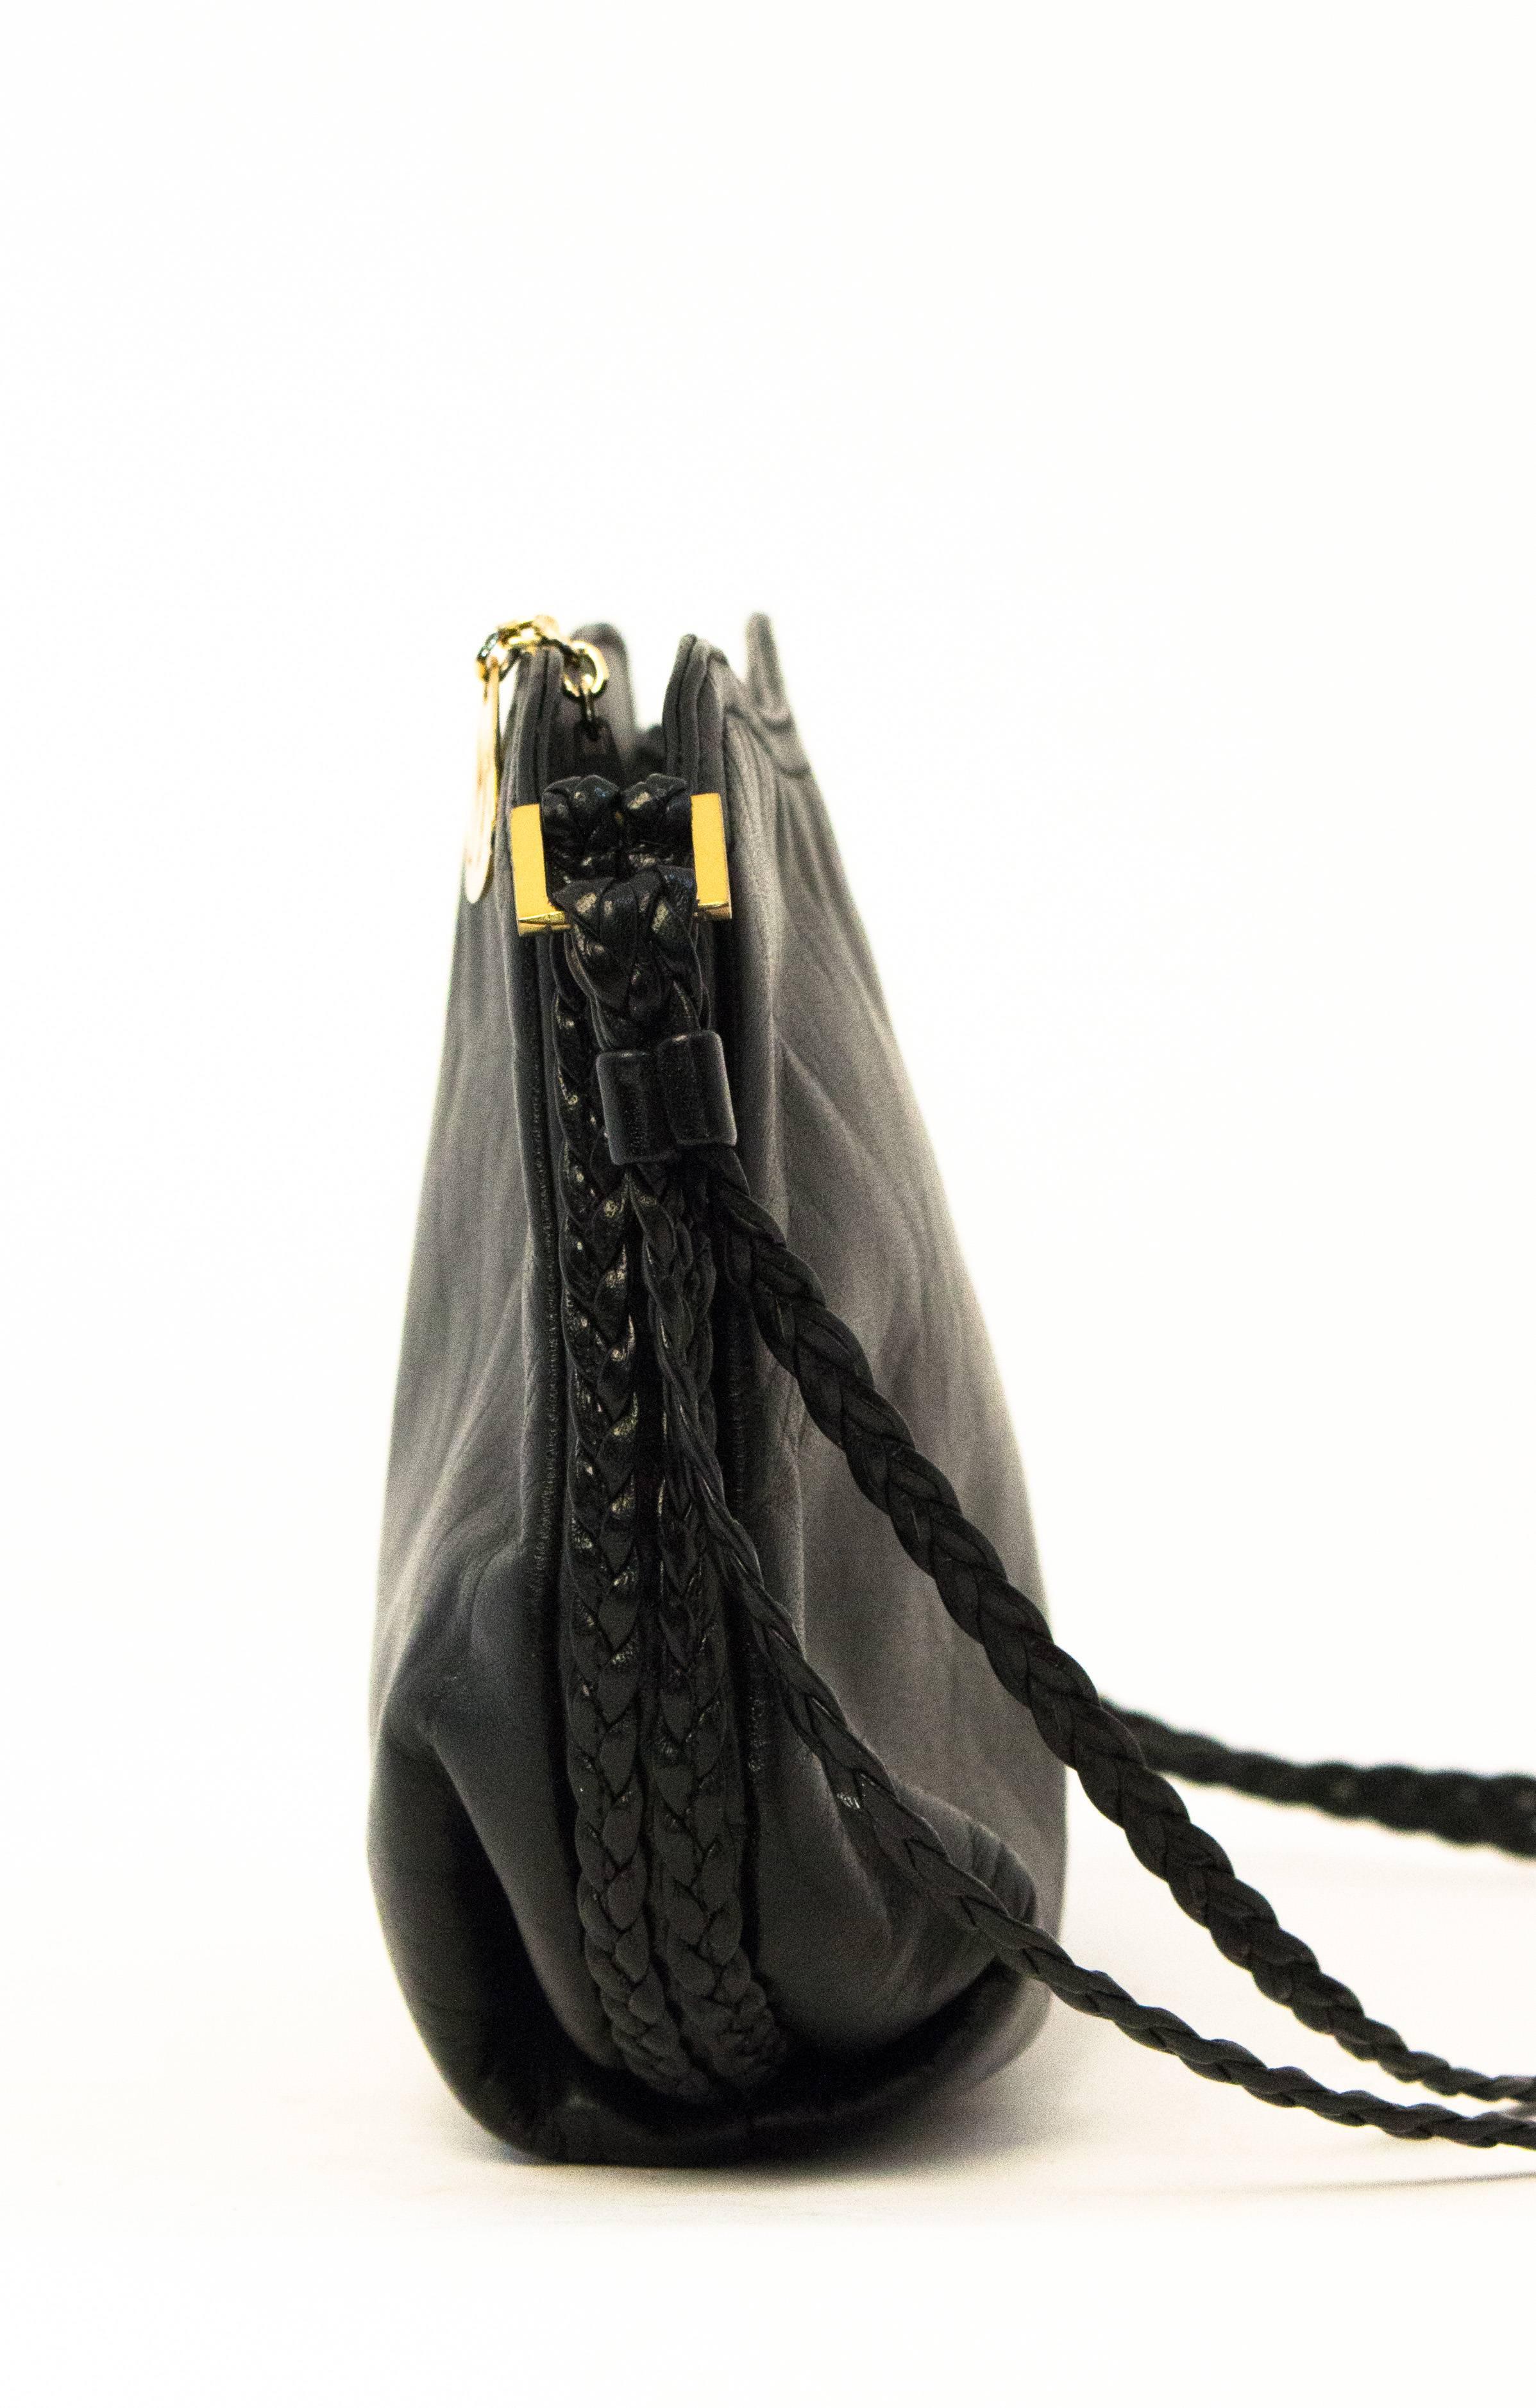 80s black leather Morris Moskowitz purse with braided strap and trim. Gold tone hardware. One zippered interior pocket.Grosgrain lining. 

Measurements:
Width: 9